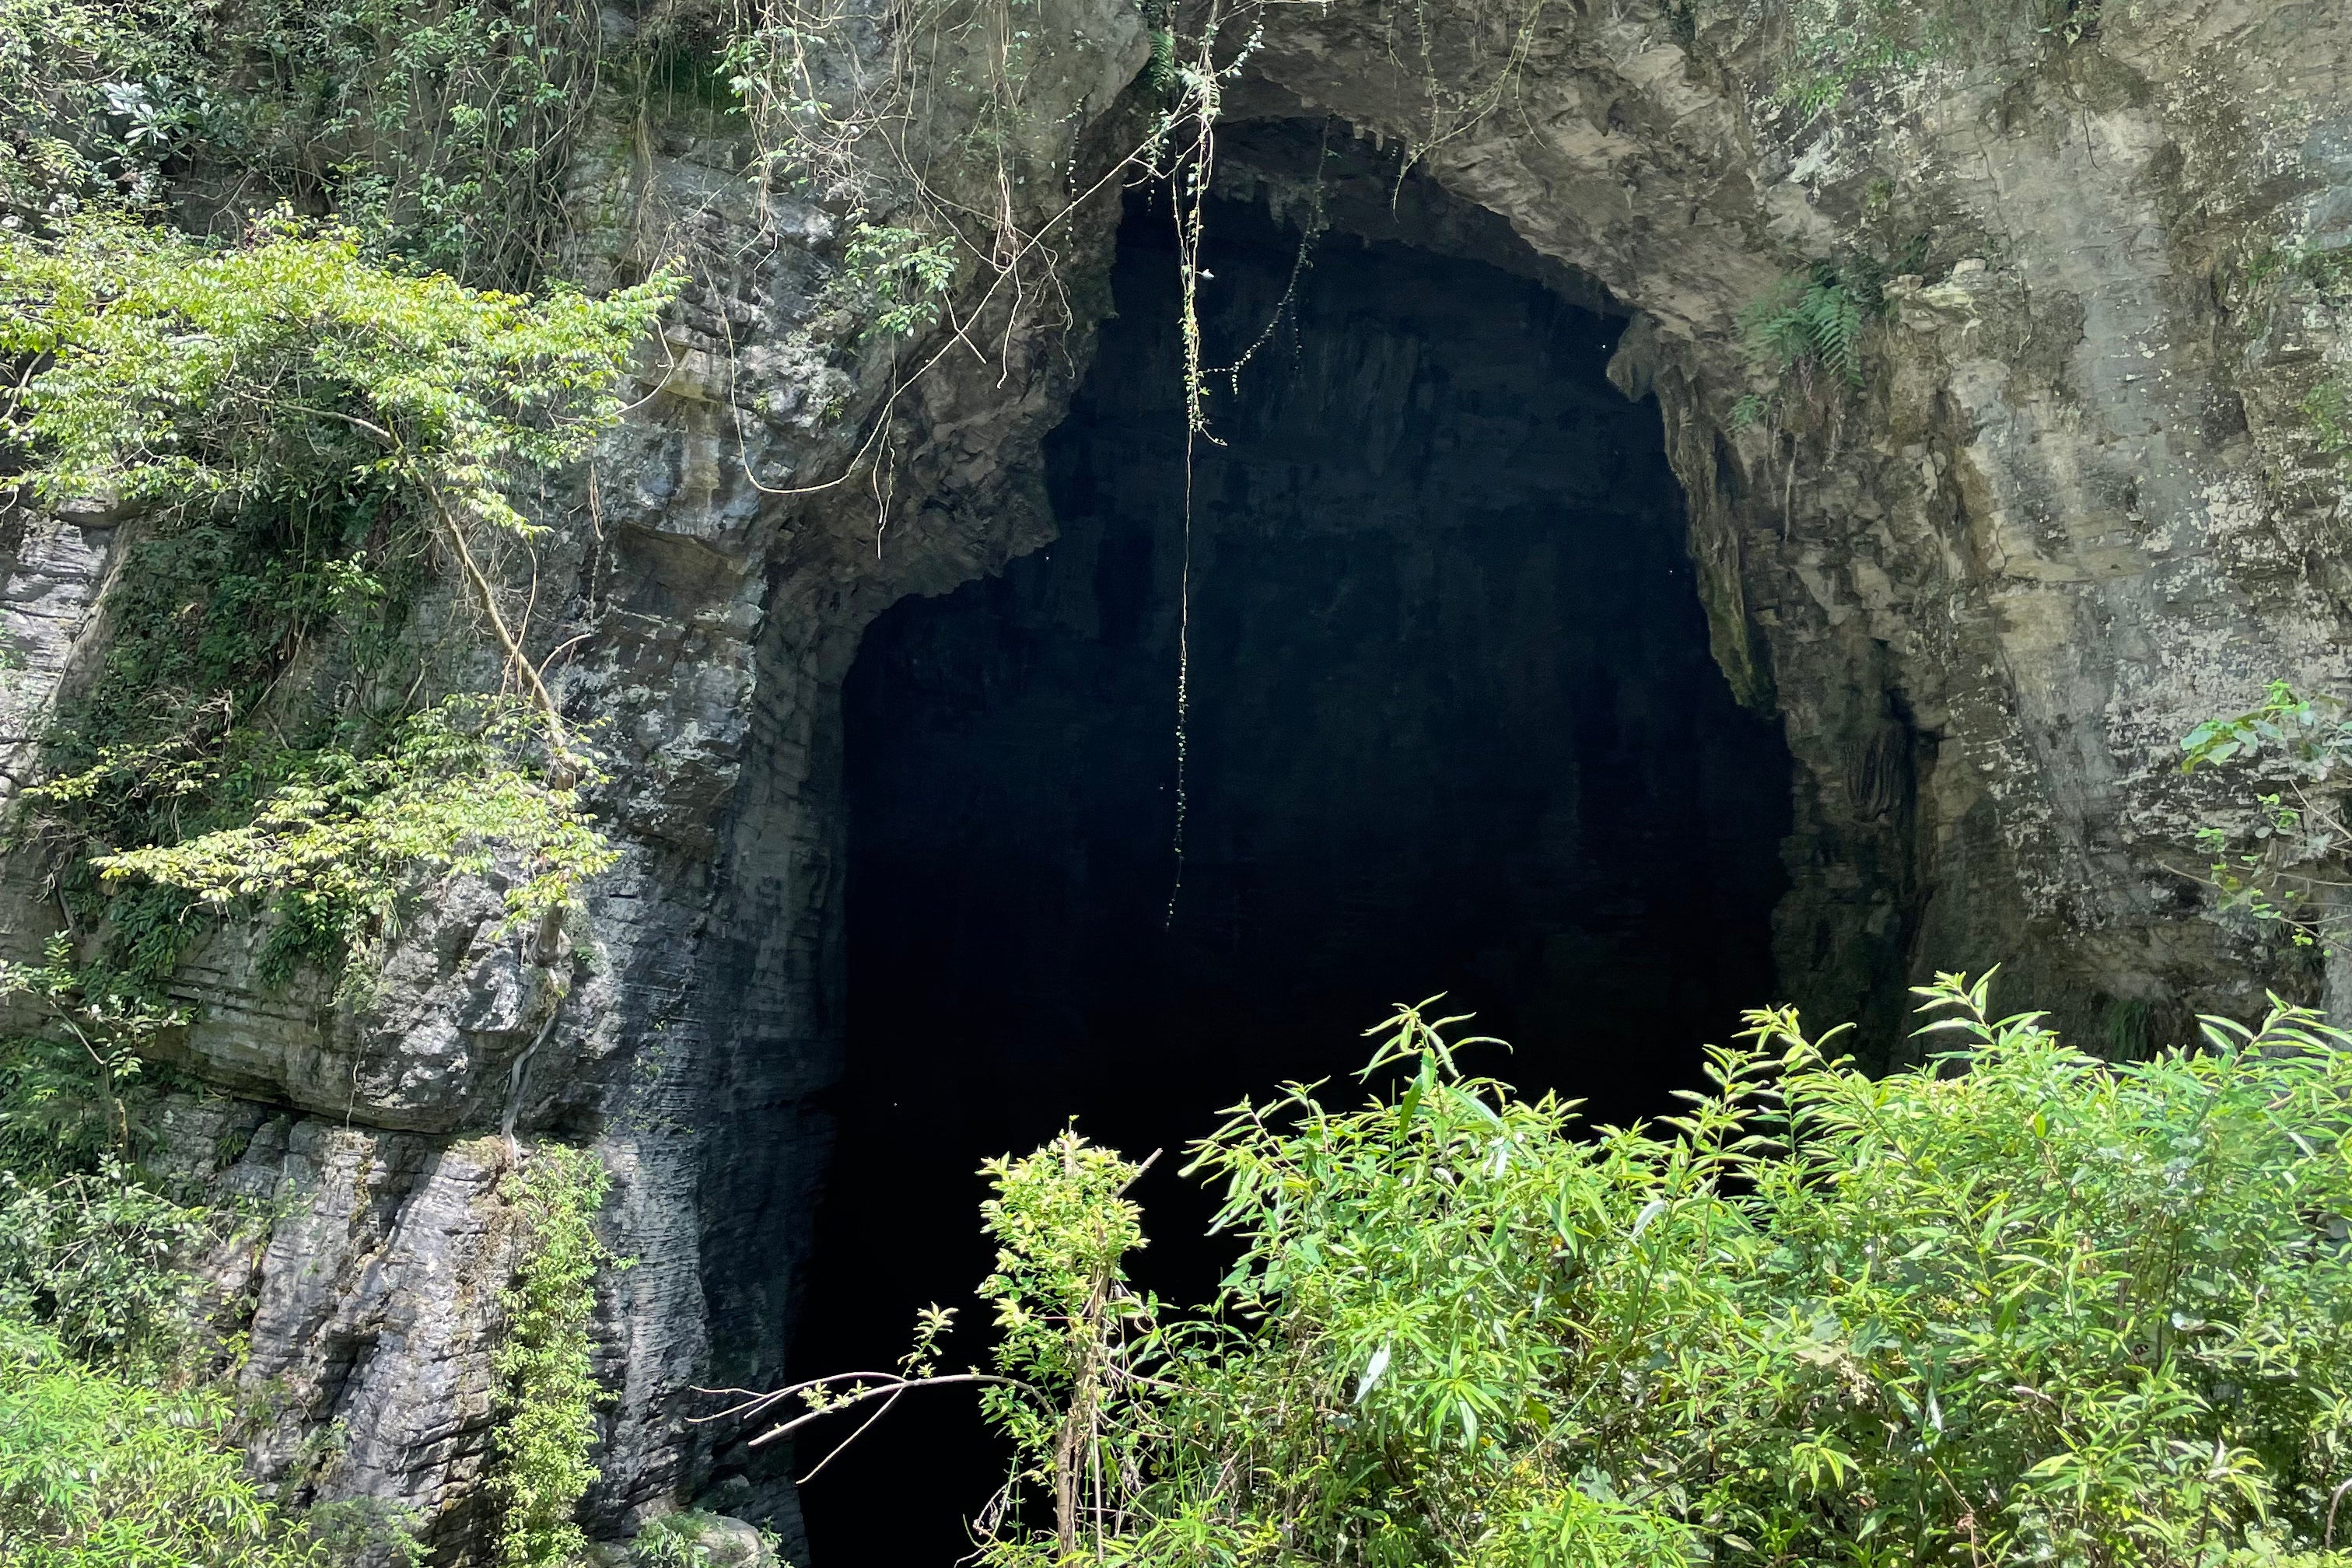 An entrance to the Tenglong Cave system. Tourists are not allowed to enter here but villagers can go for water